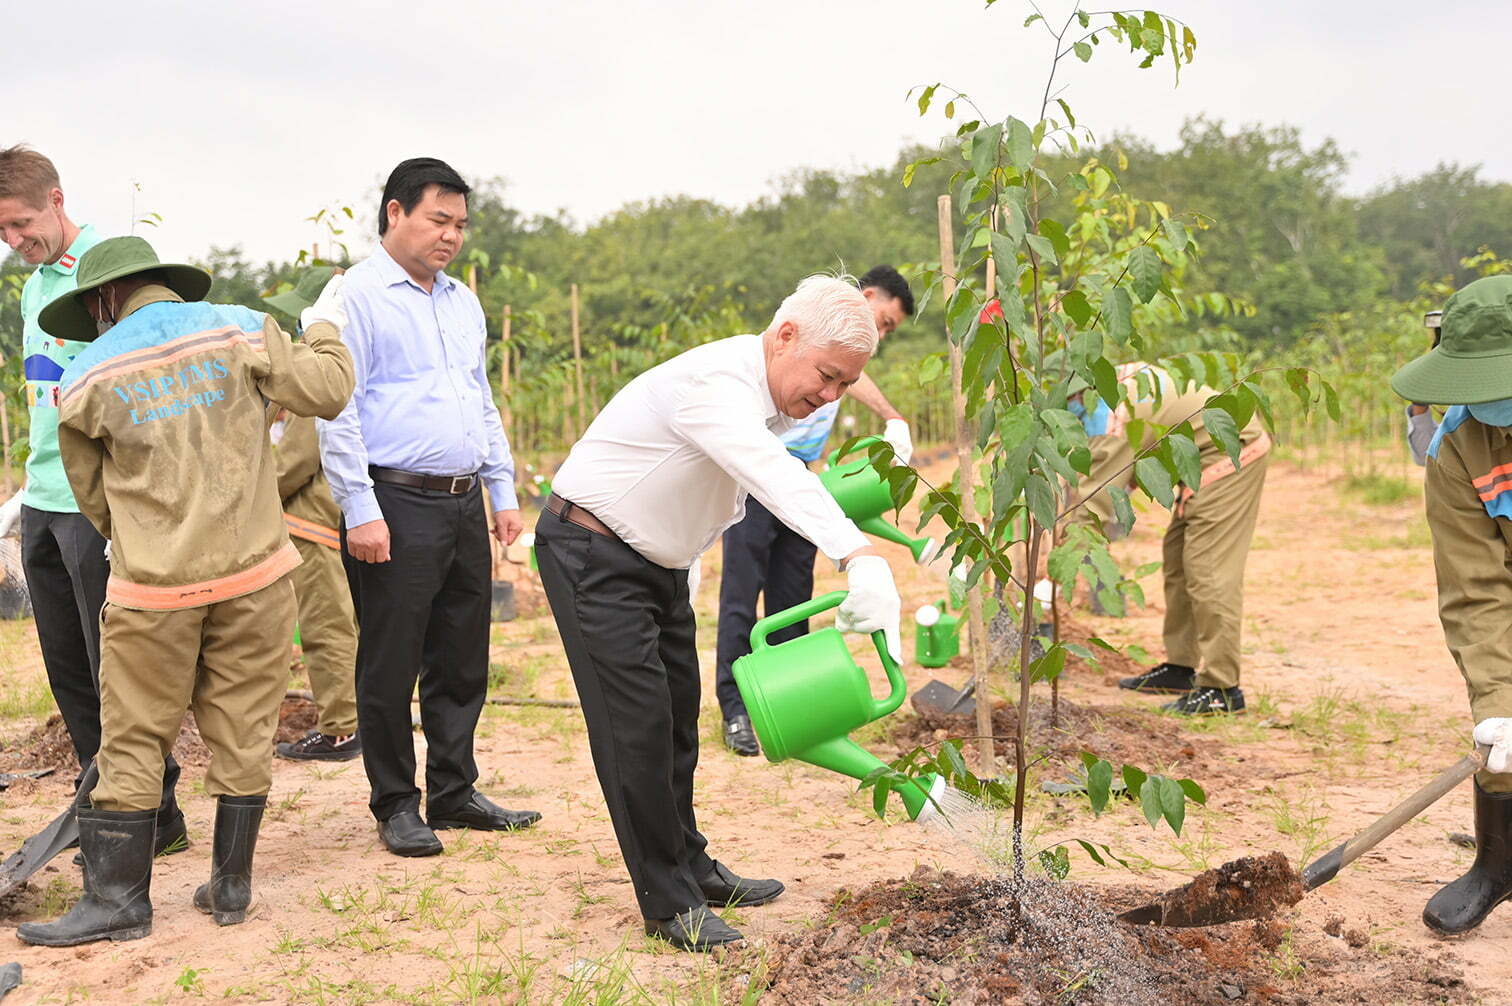 Tree planting event at LEGO Factory in Vietnam, The Secretary of the Provincial Party Committee, Nguyen Van Loi